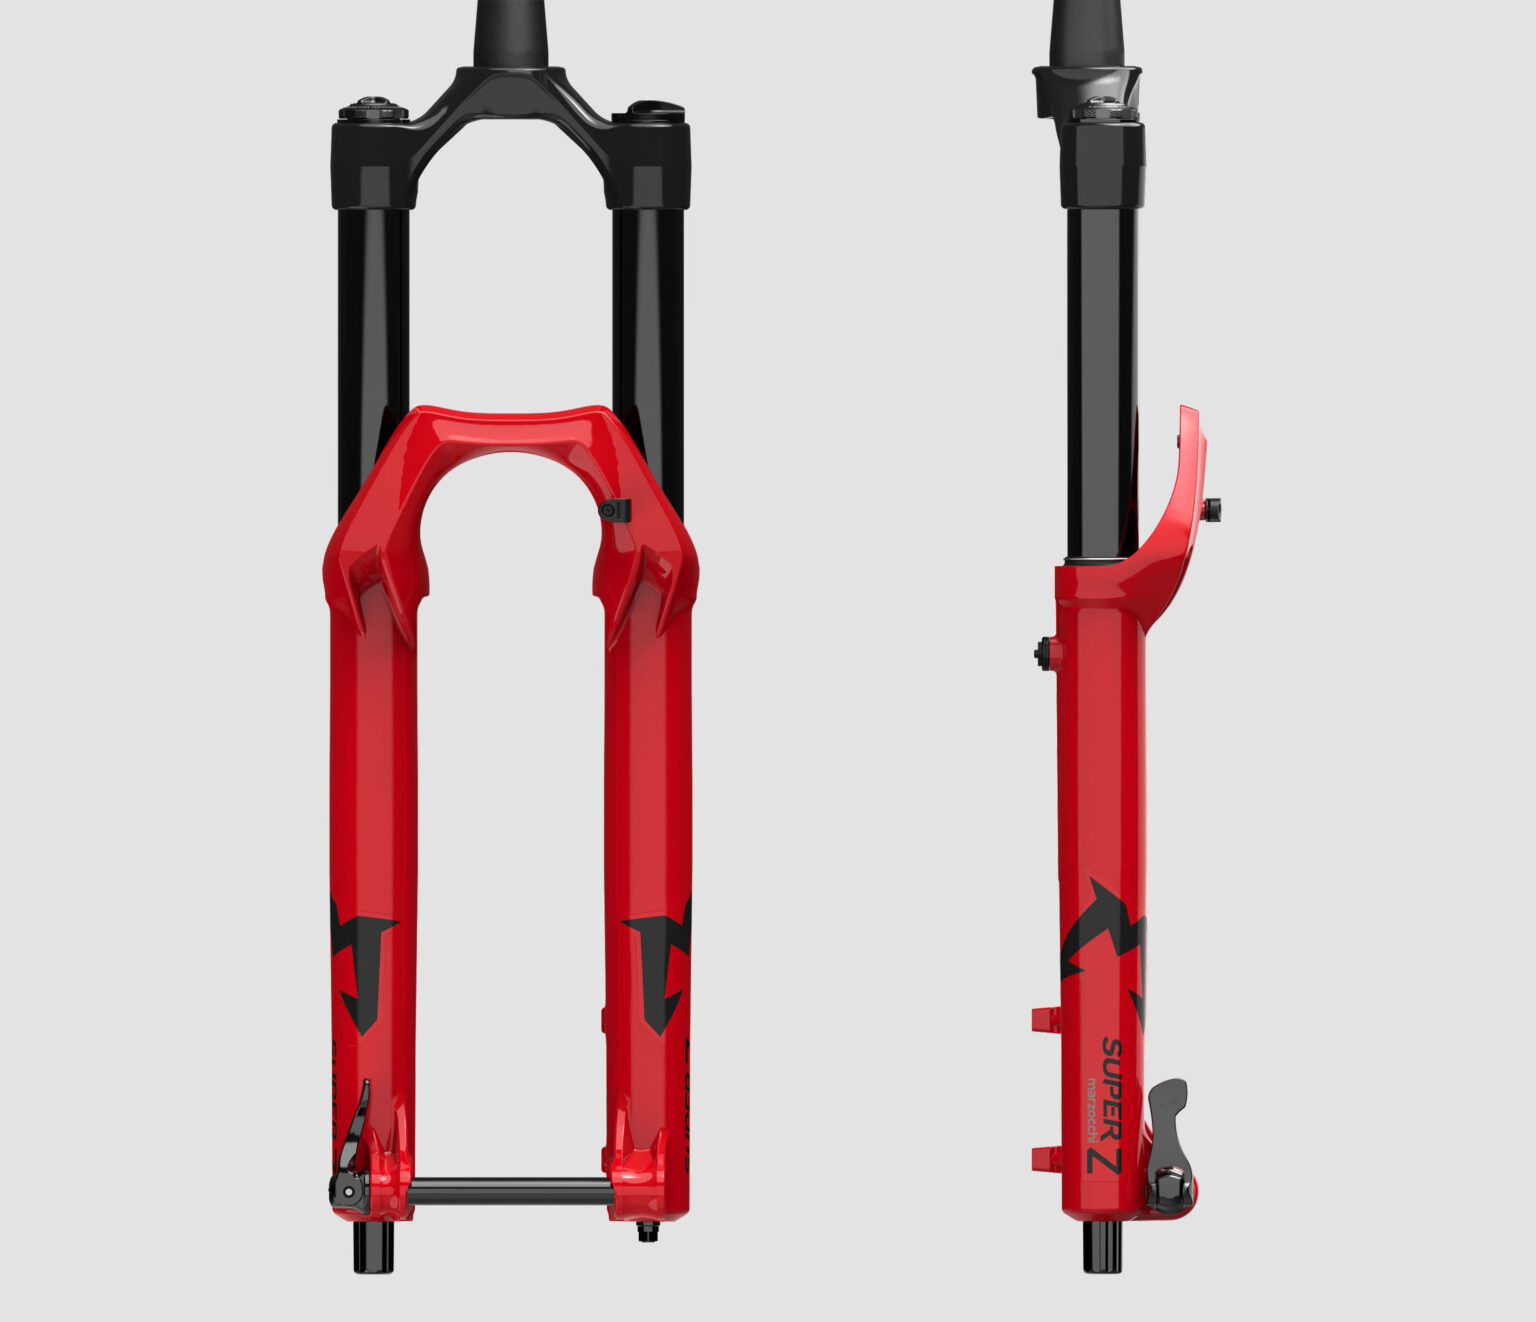 new marzocchi super z fork shown from various angles